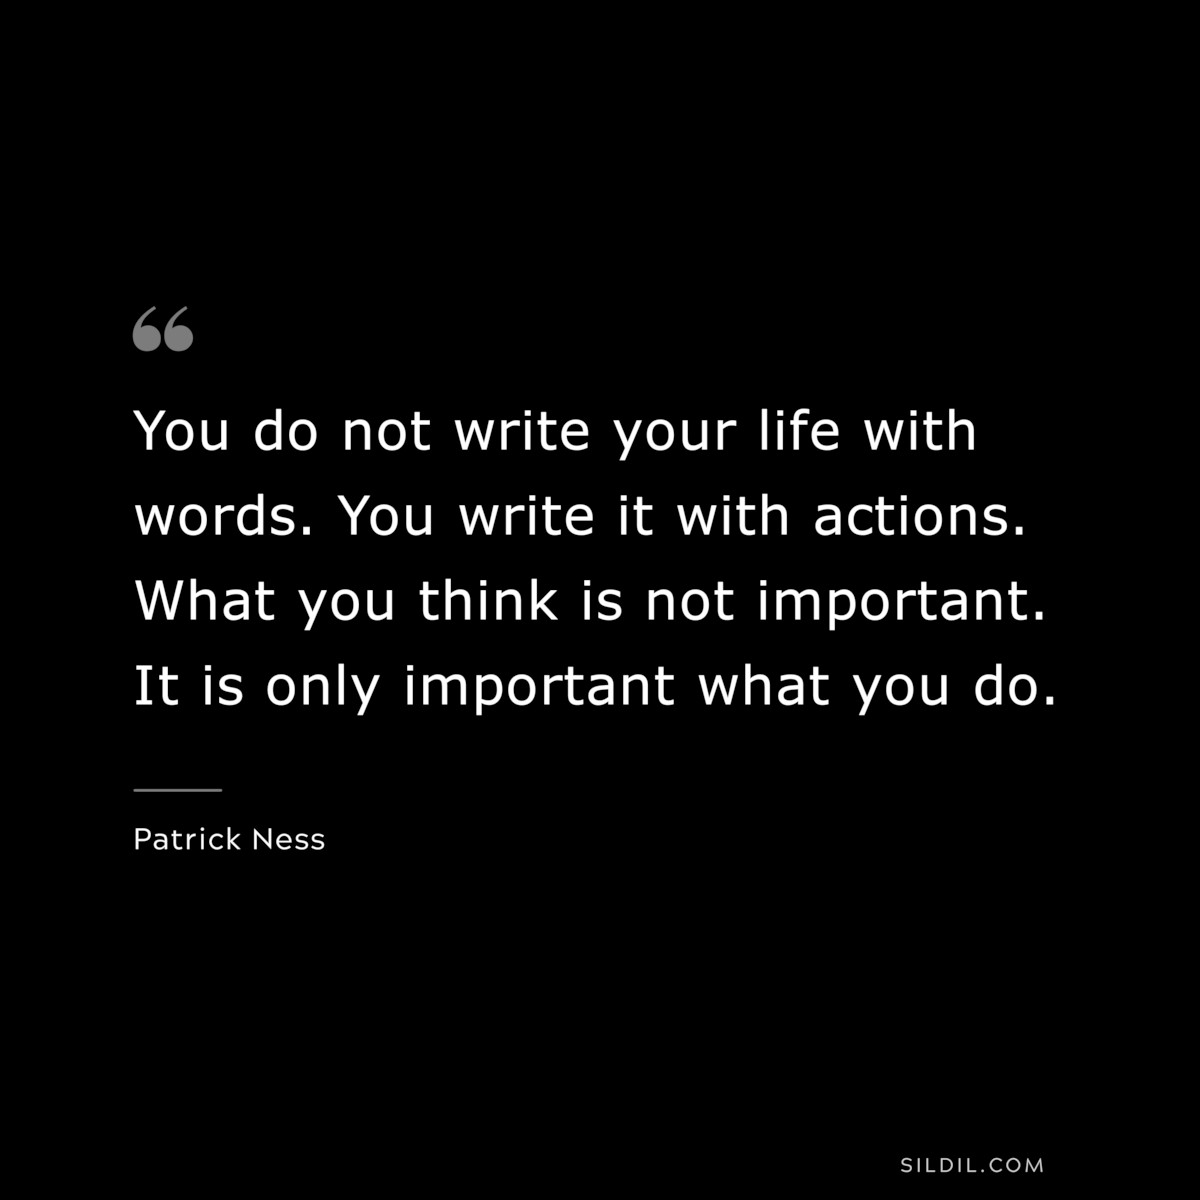 You do not write your life with words. You write it with actions. What you think is not important. It is only important what you do. ― Patrick Ness